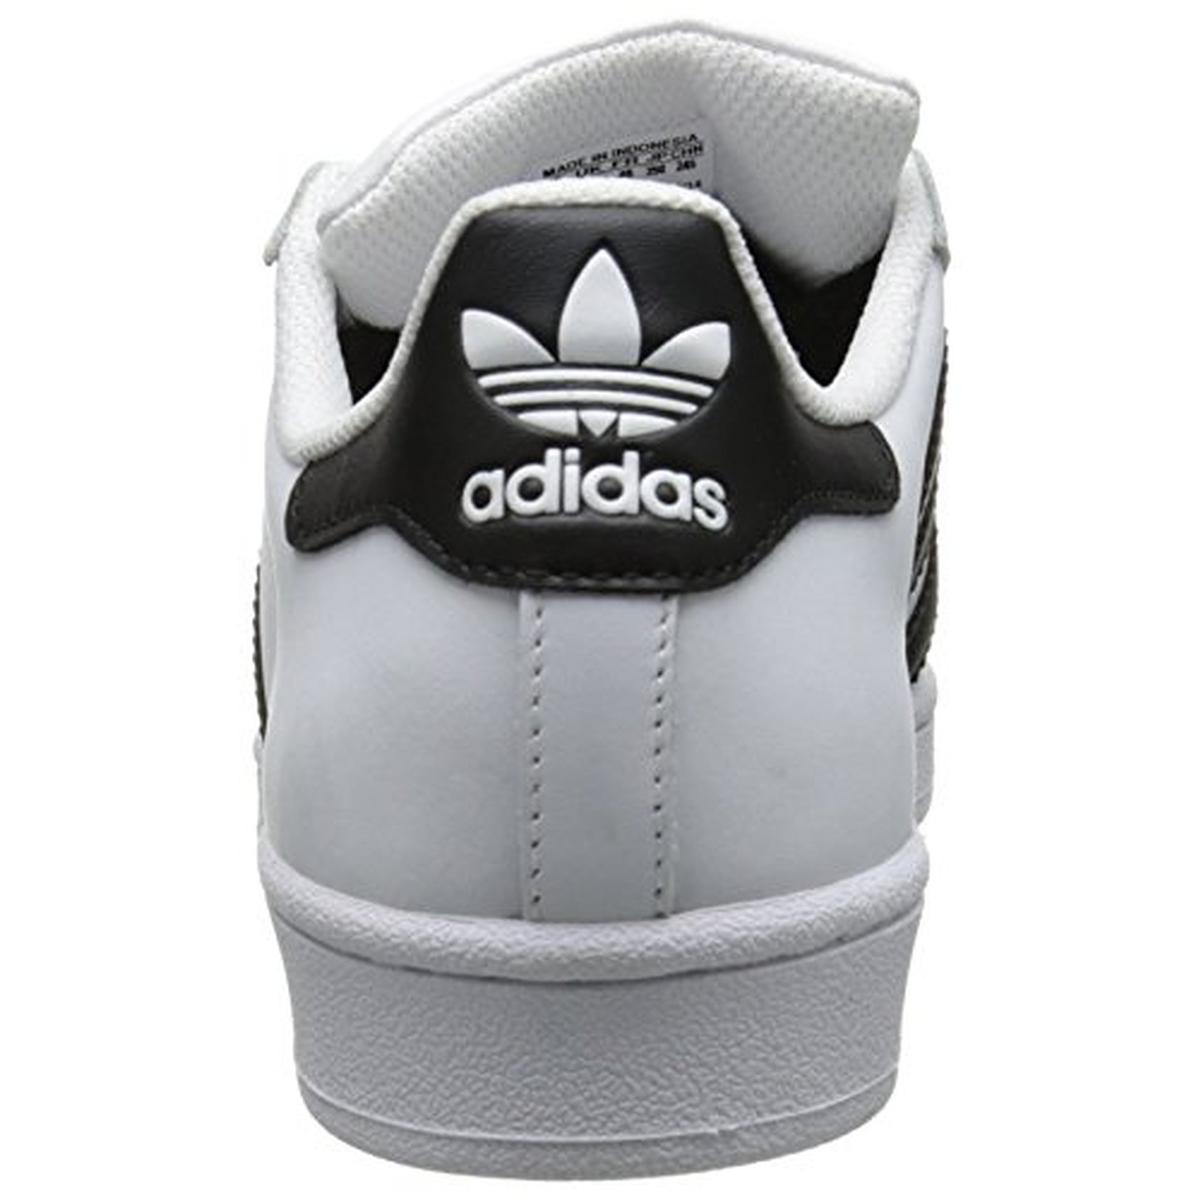 Adidas Superstar Womens Leather Lifestyle Athletic Shoes